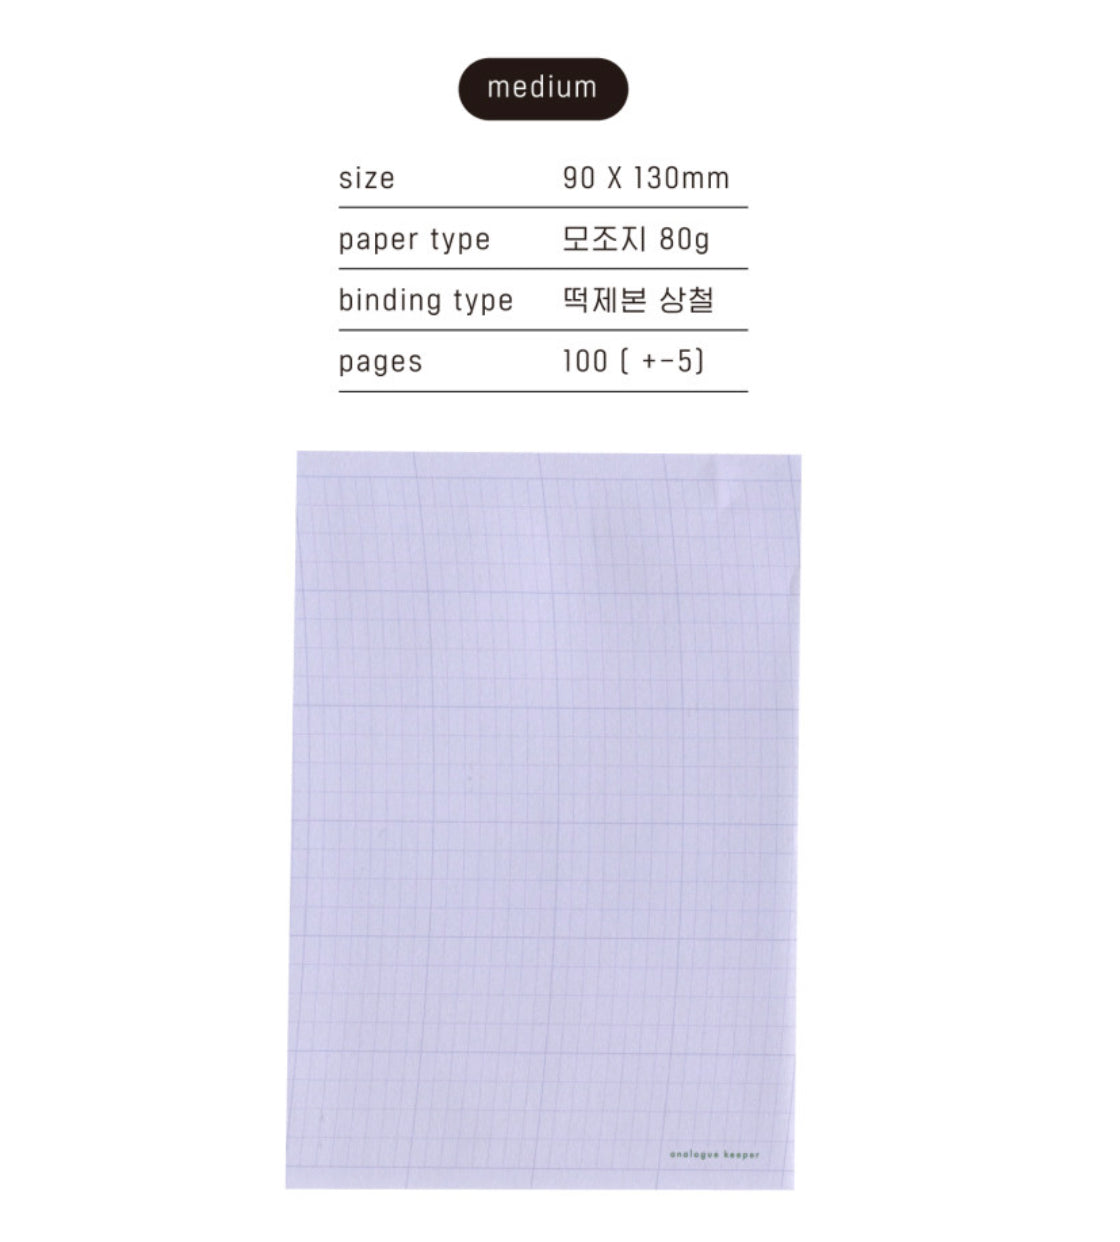 Analogue Keeper Oval Grid Memo Pads